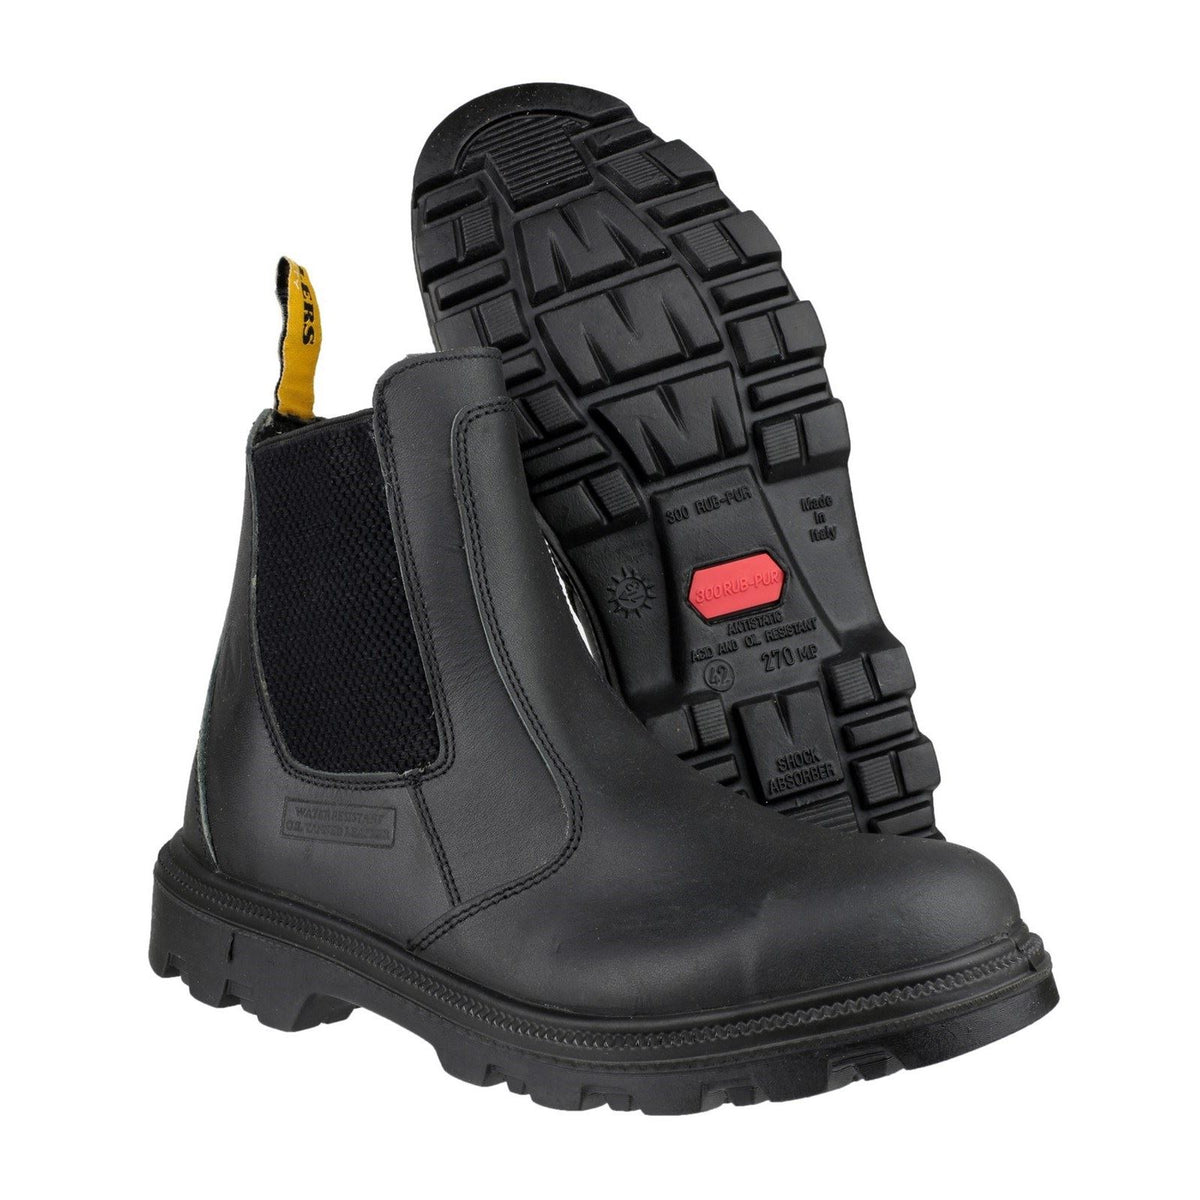 Amblers Safety FS129 Water Resistant Pull on Safety Dealer Boots